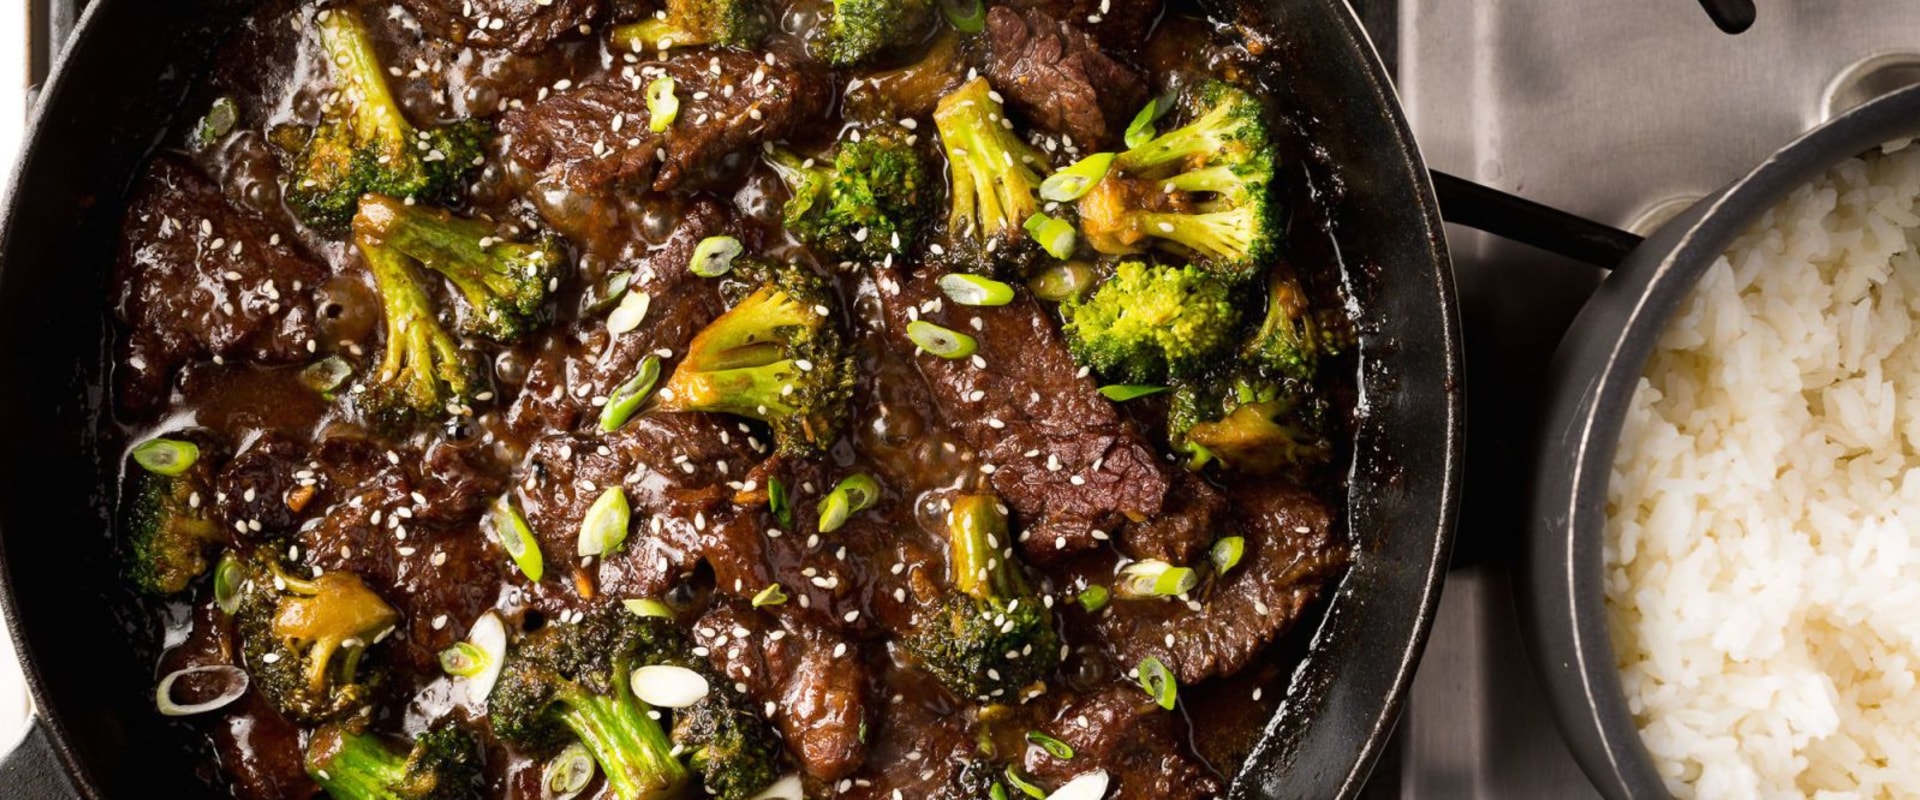 Beef and Broccoli Stir Fry: A Delicious and Easy Recipe to Add to Your Chinese Cooking Repertoire